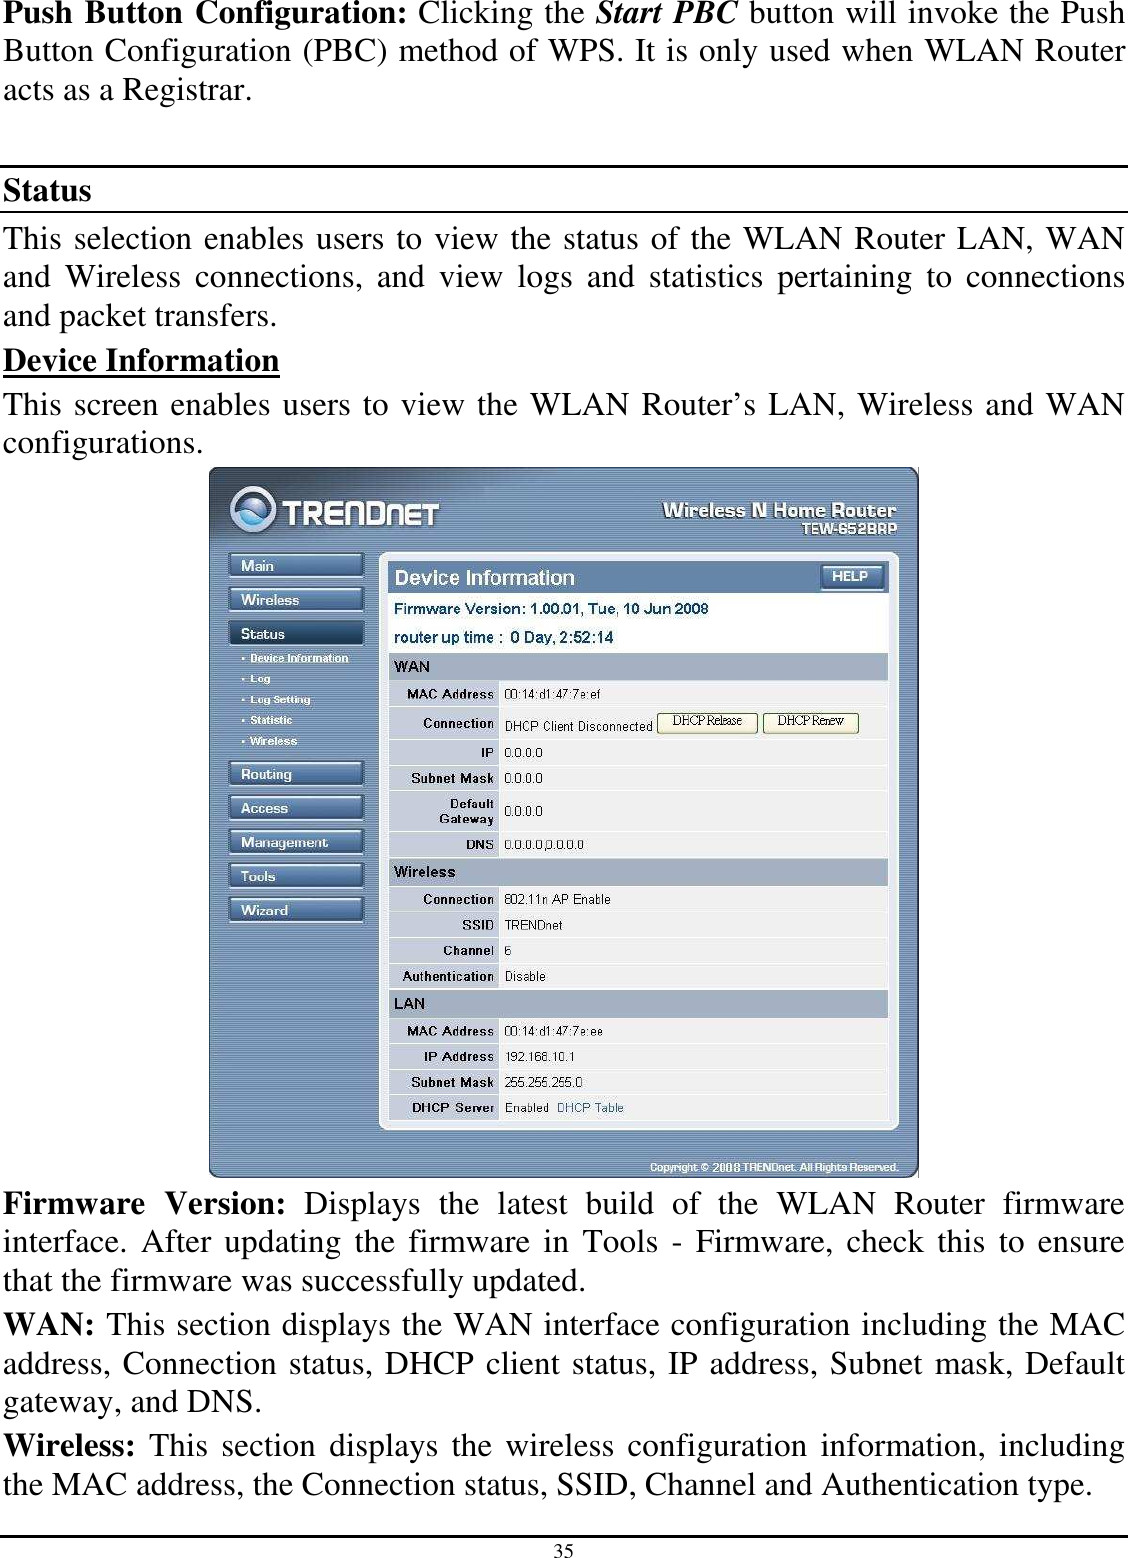 35 Push Button Configuration: Clicking the Start PBC button will invoke the Push Button Configuration (PBC) method of WPS. It is only used when WLAN Router acts as a Registrar.  Status This selection enables users to view the status of the WLAN Router LAN, WAN and  Wireless  connections,  and  view  logs  and  statistics  pertaining  to  connections and packet transfers. Device Information This screen enables users to view the WLAN Router’s LAN, Wireless and WAN configurations.  Firmware  Version:  Displays  the  latest  build  of  the  WLAN  Router  firmware interface.  After updating  the  firmware in  Tools - Firmware,  check this  to ensure that the firmware was successfully updated. WAN: This section displays the WAN interface configuration including the MAC address, Connection status, DHCP client status, IP address, Subnet mask, Default gateway, and DNS.  Wireless:  This  section  displays the wireless  configuration information, including the MAC address, the Connection status, SSID, Channel and Authentication type. 